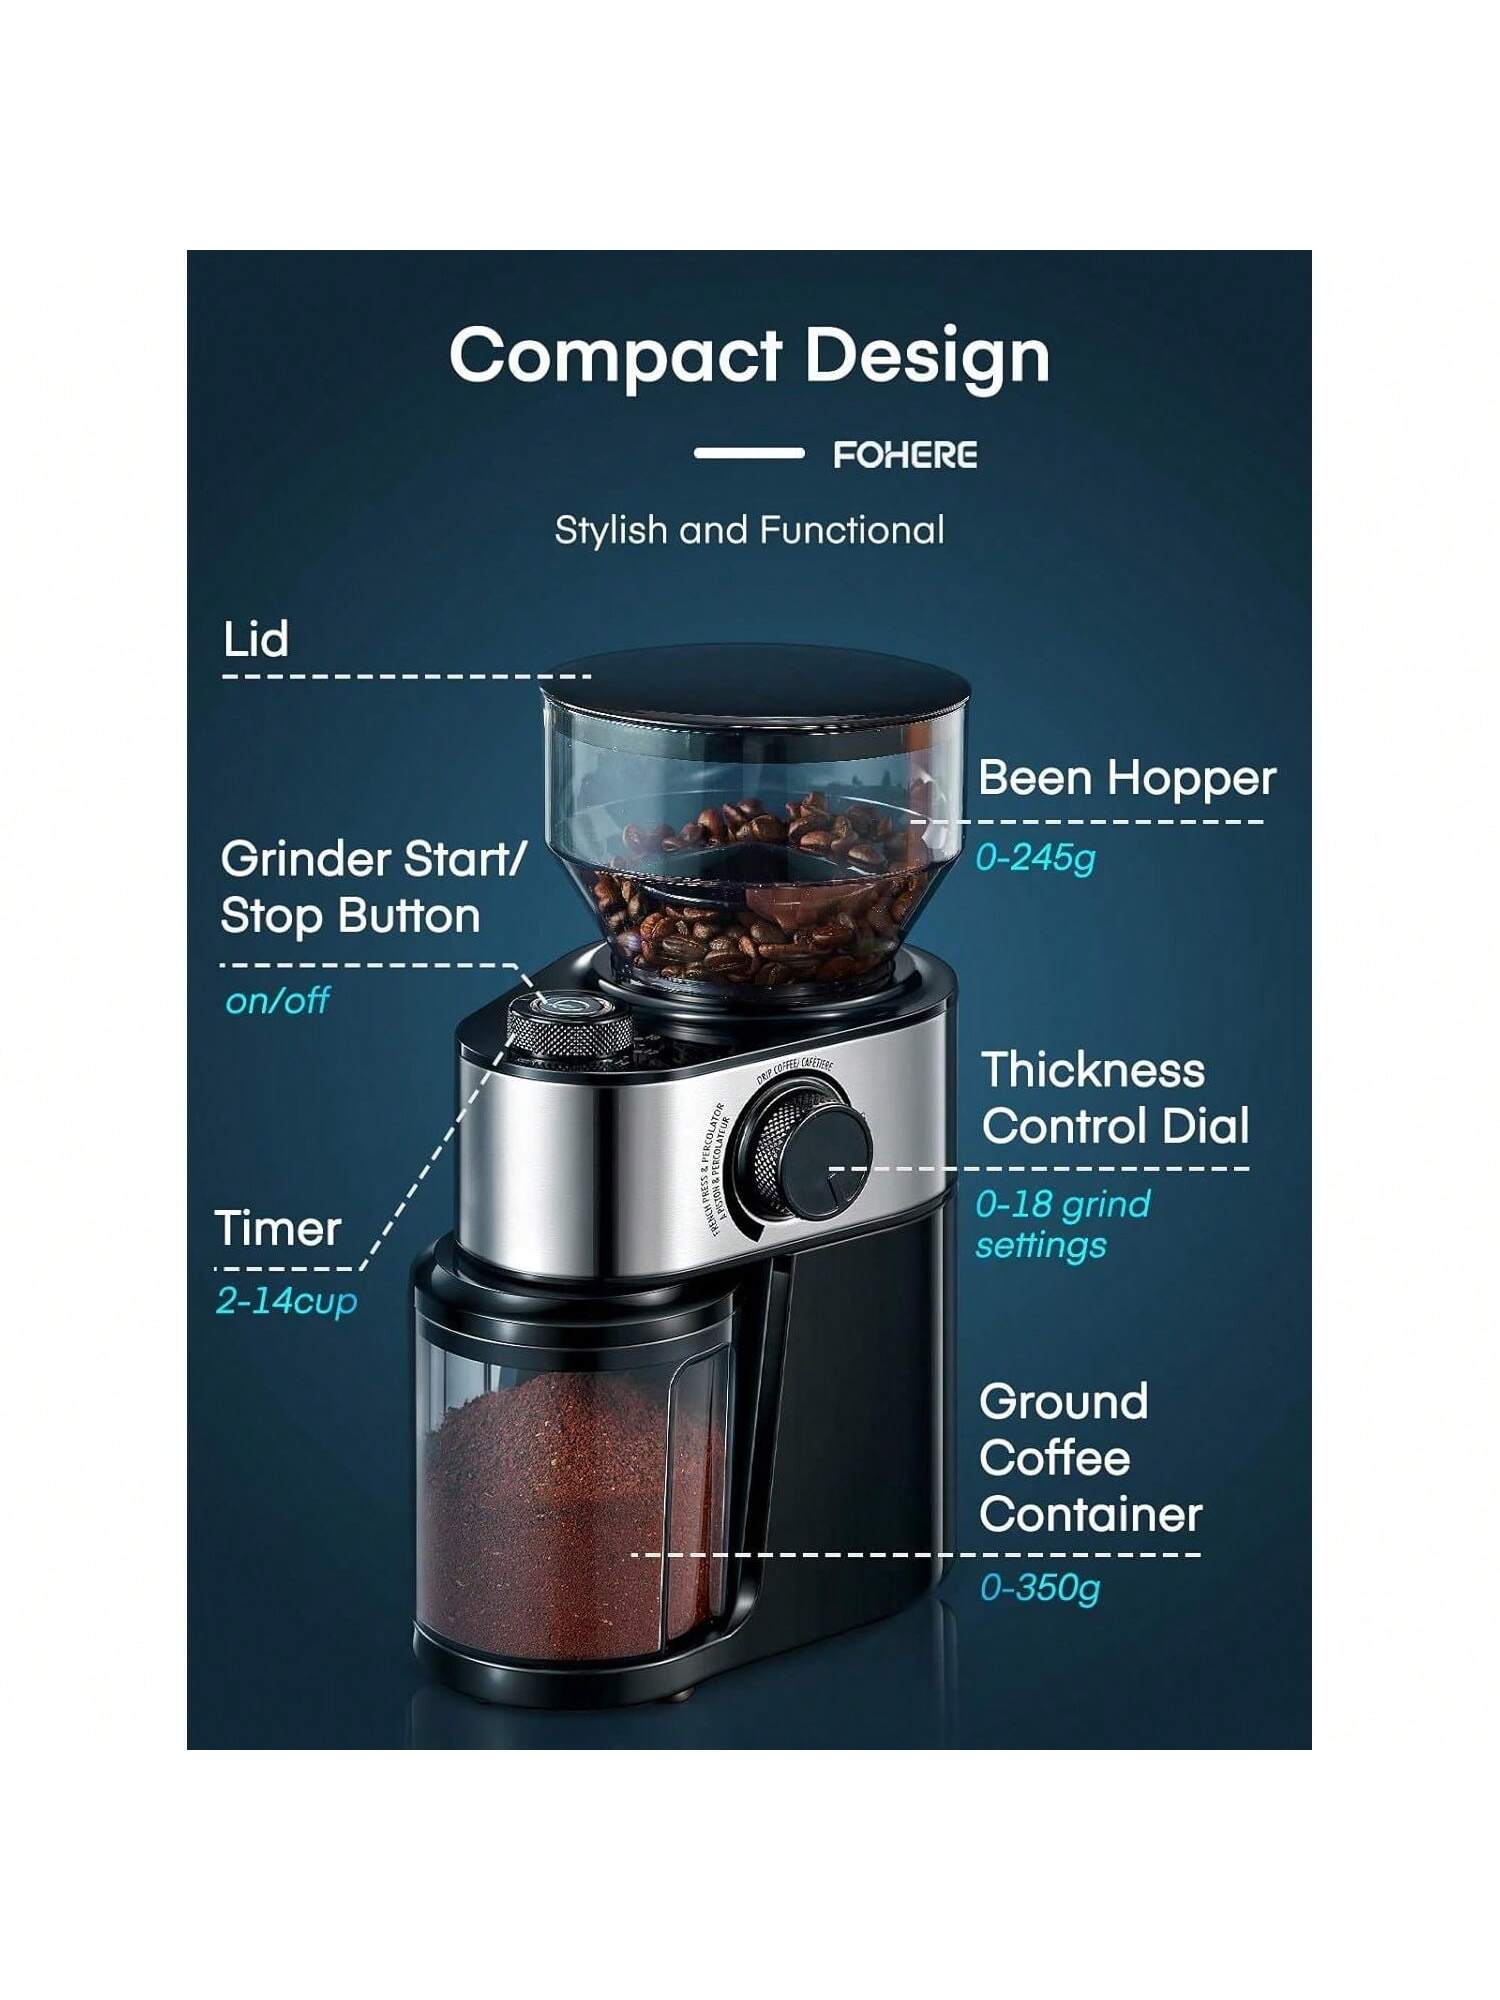 Aigostar Electric Kettle Temperature Control and Coffee Grinder Electric,  160W Detachable Coffee Bean and Spice Grinders, Stainless Steel Blade 